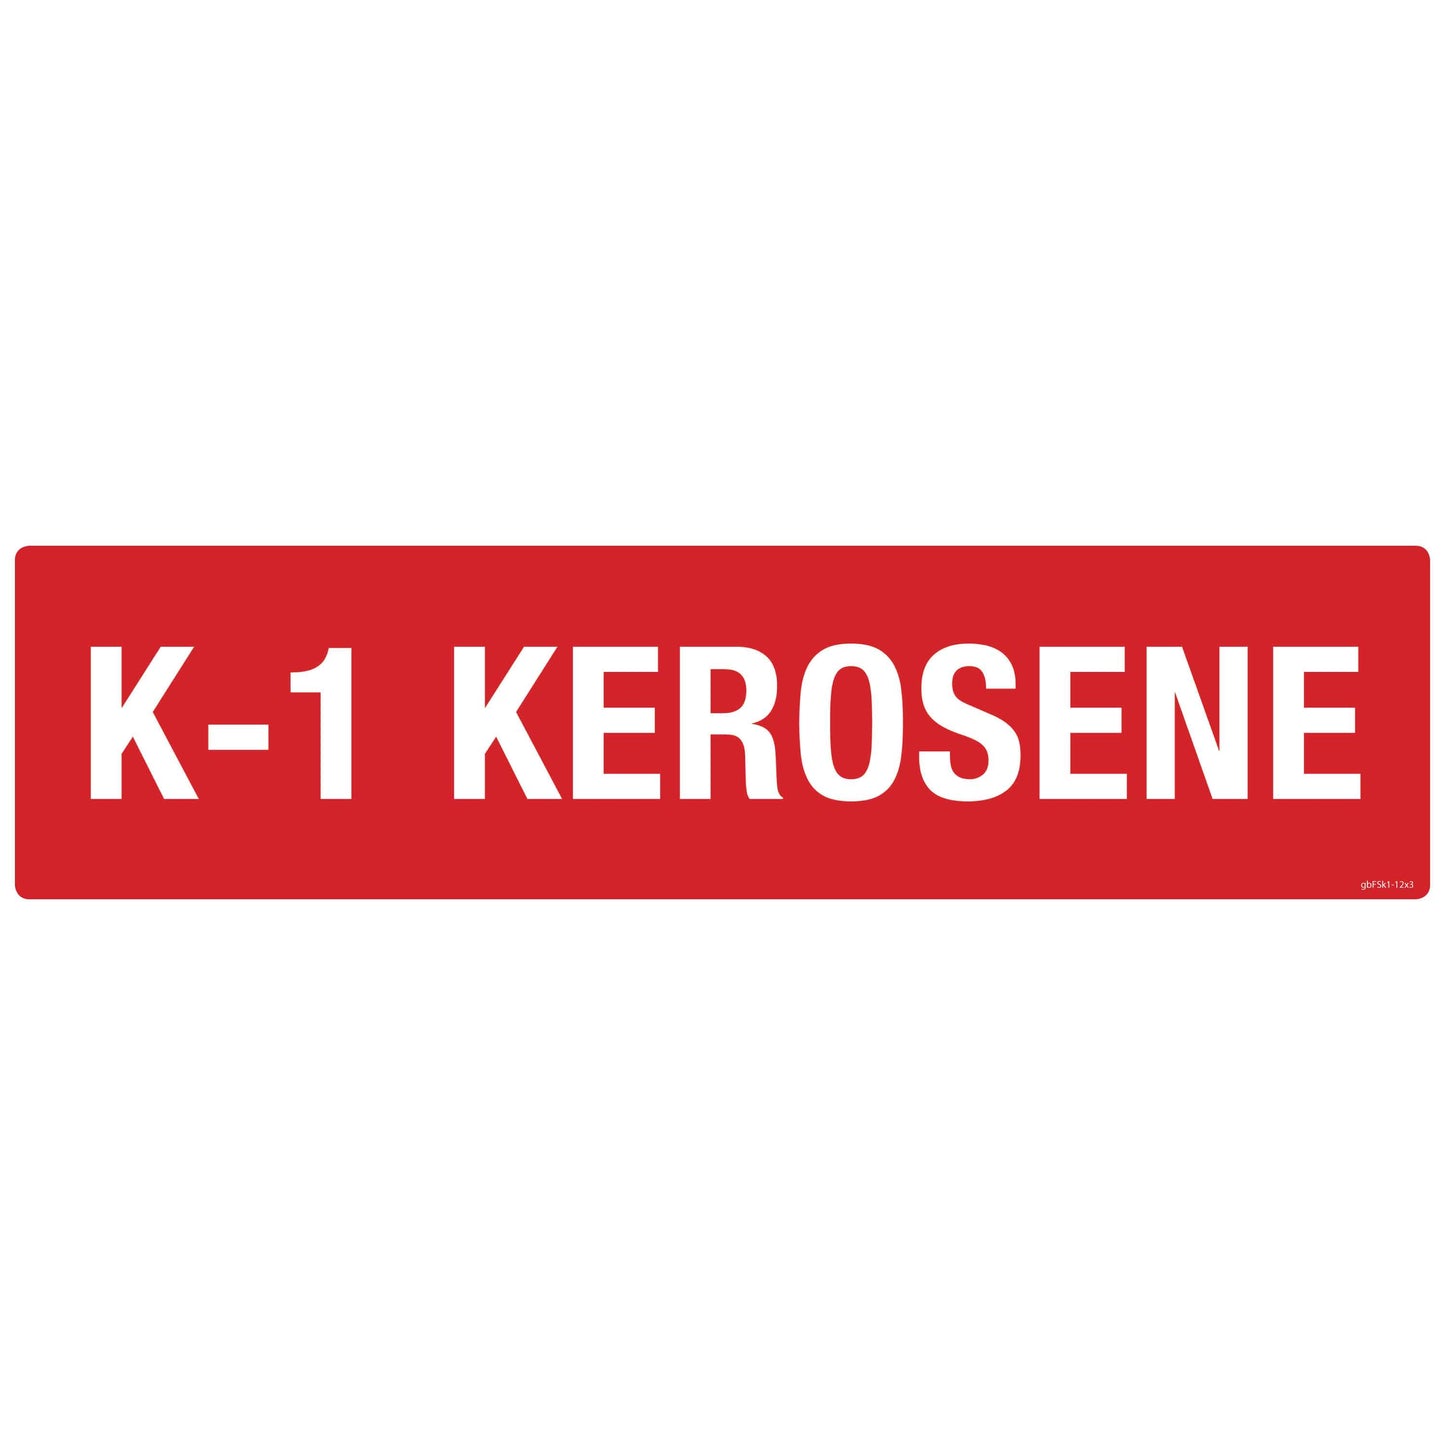 Kerosene Decal. 12 inches by 3 inches in size.